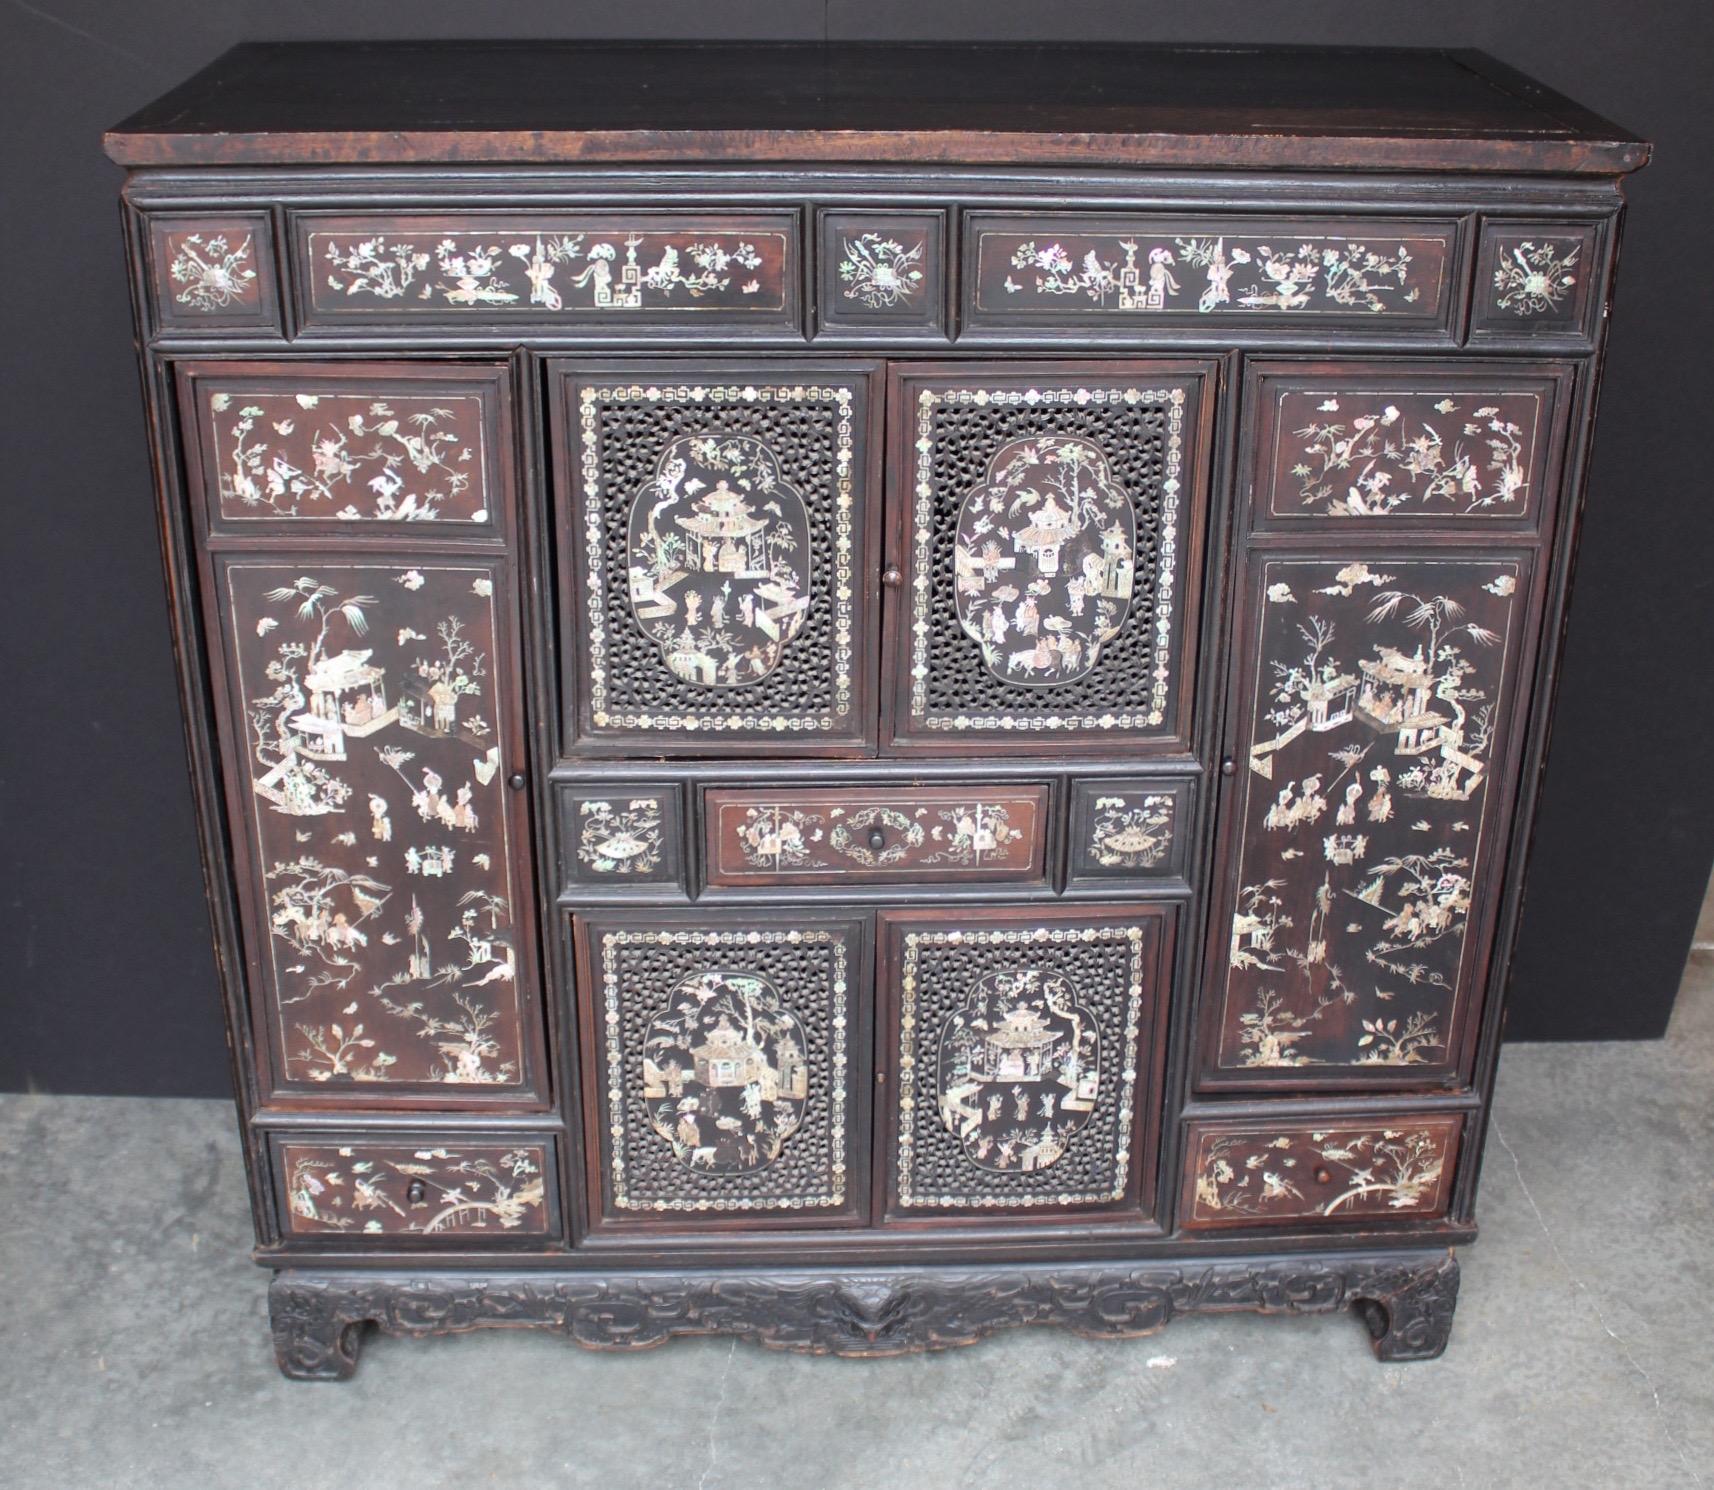 19th century Chinese cabinet of exceptional design and truly stunning mother-of-pearl inlay work. This ebonized wood cabinet representing diverse Chinese Scenery.
Opens by six carved doors with inside shelves and three drawers for storage carved